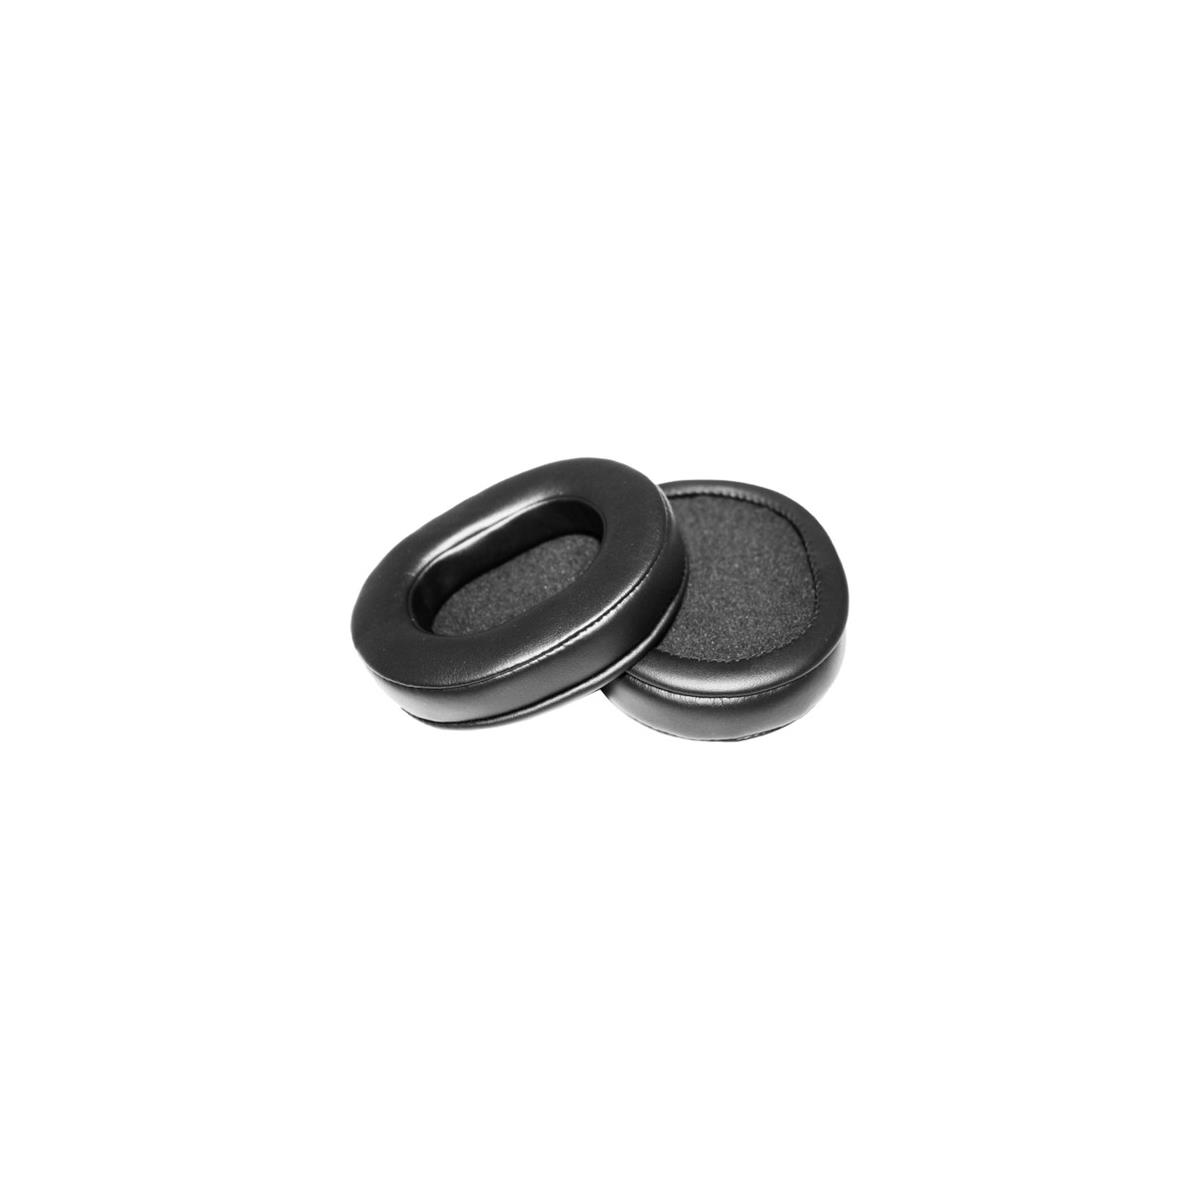 Image of Dekoni Audio Platinum Protein Leather Ear Pads for ATHM50X